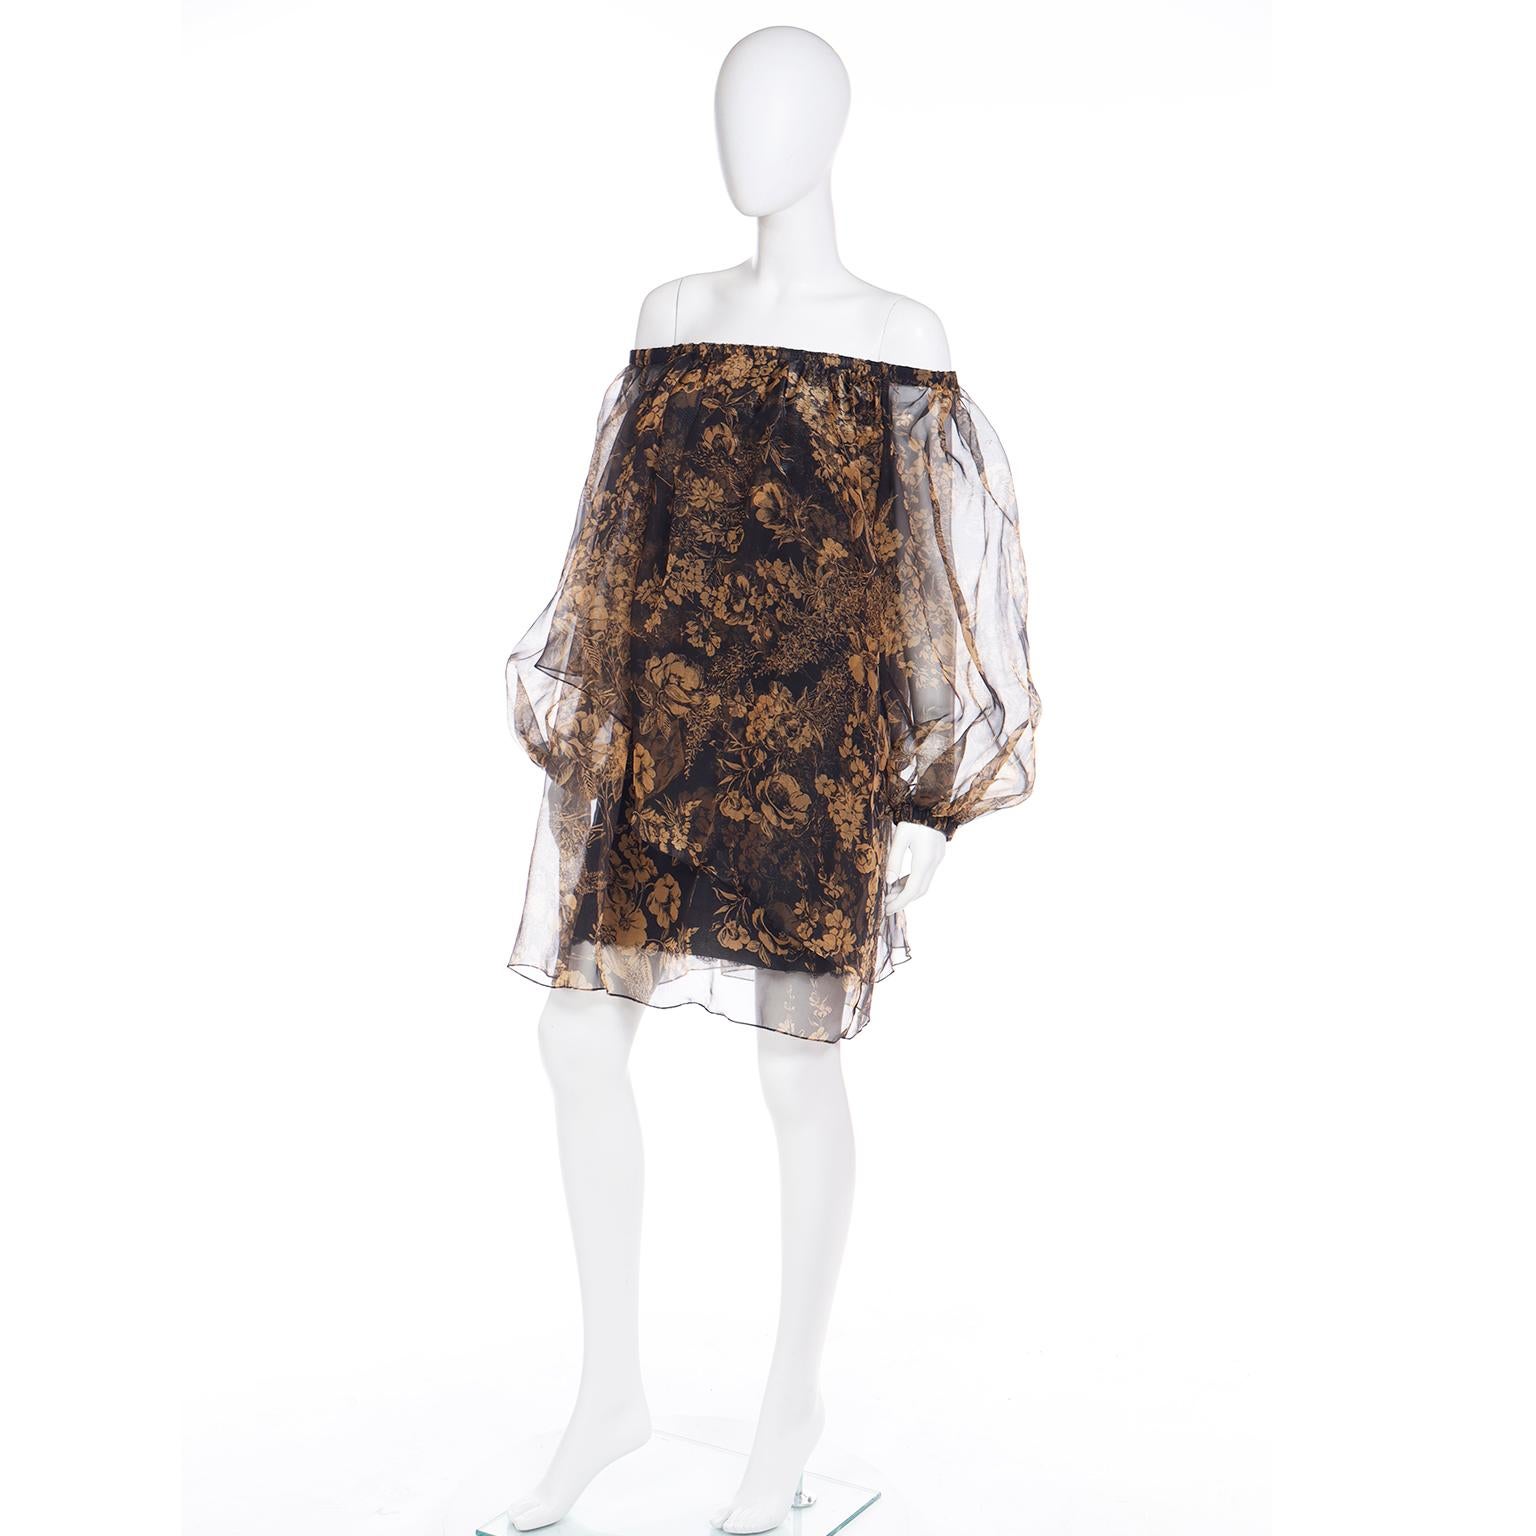 Women's 1990 Yves Saint Laurent Black and Gold Chiffon Dress With Sheer Balloon Sleeves For Sale